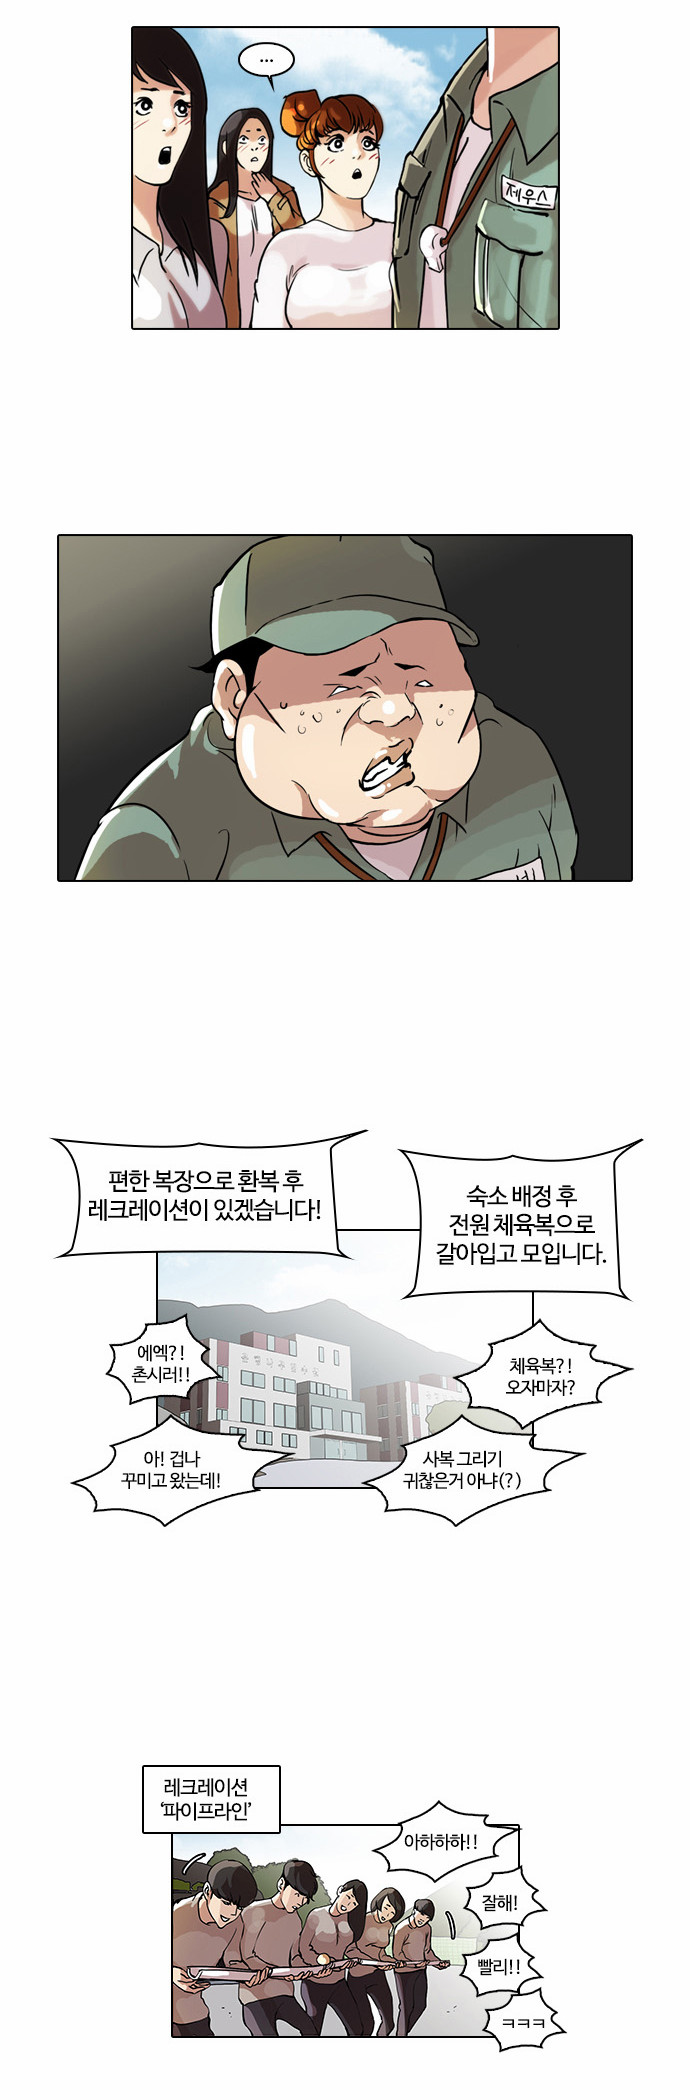 Lookism - Chapter 42 - Page 3